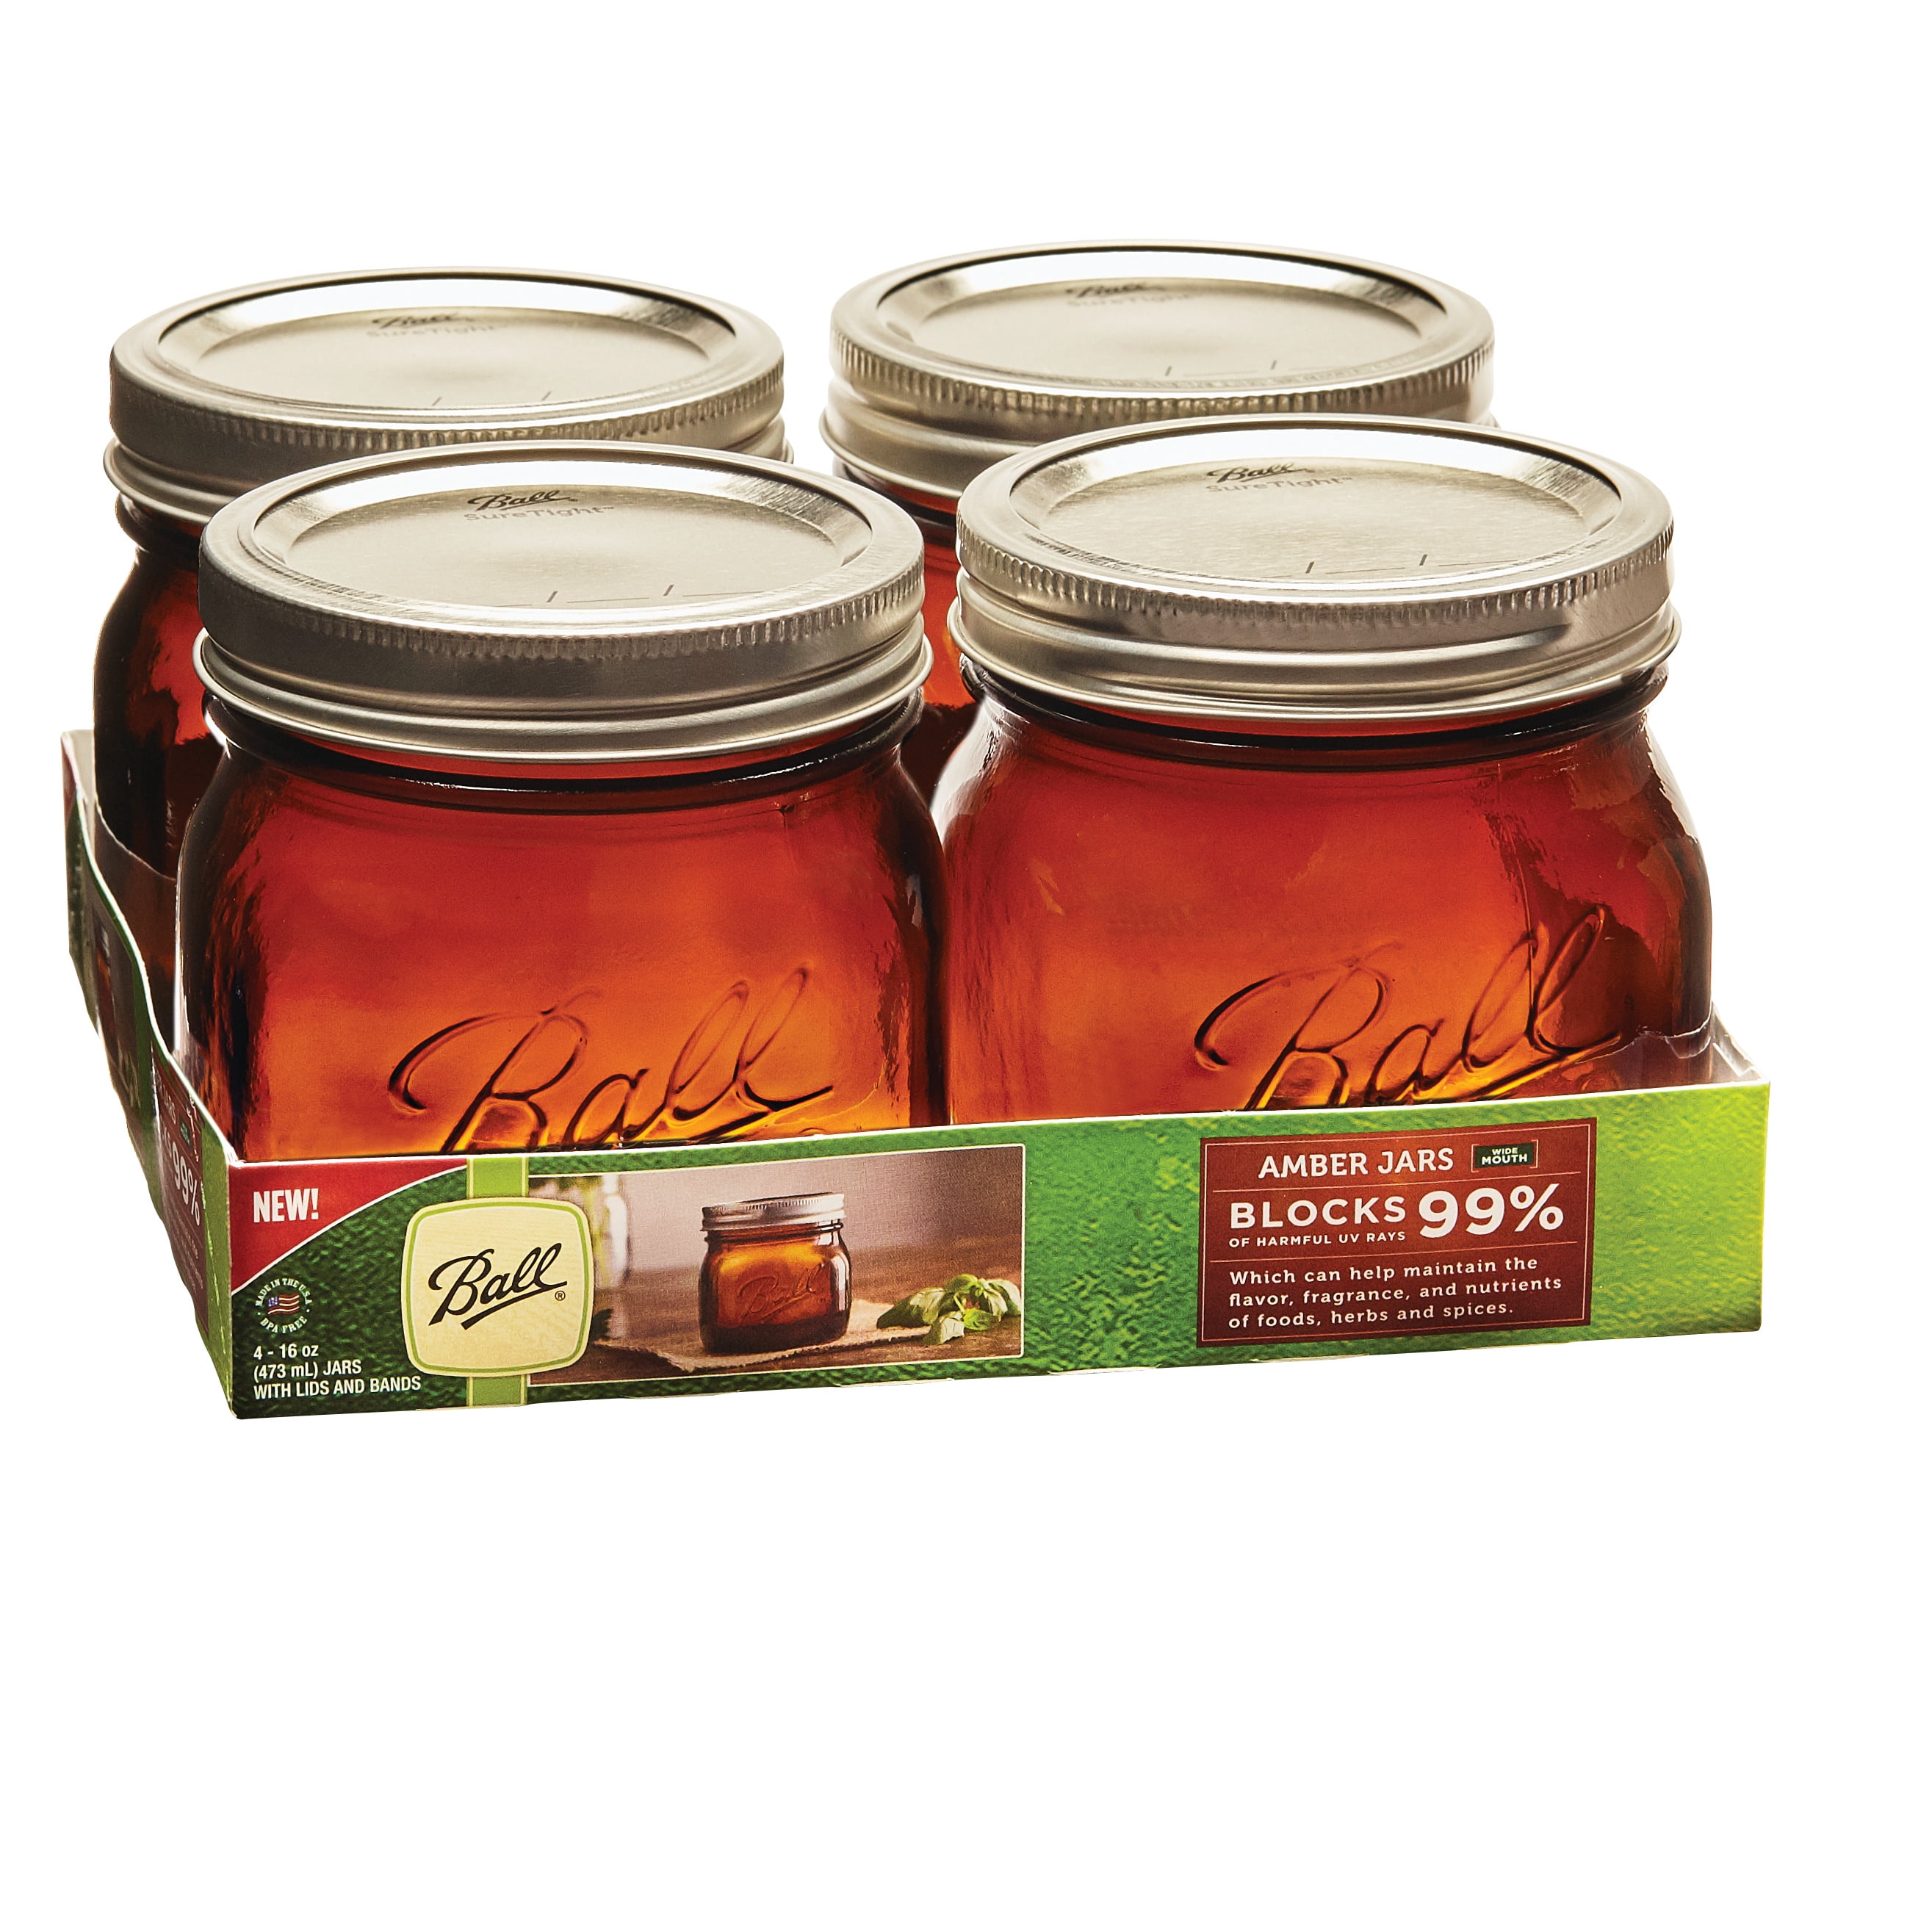 16 oz. Glass Jars with Lids - AGW1VZ - IdeaStage Promotional Products